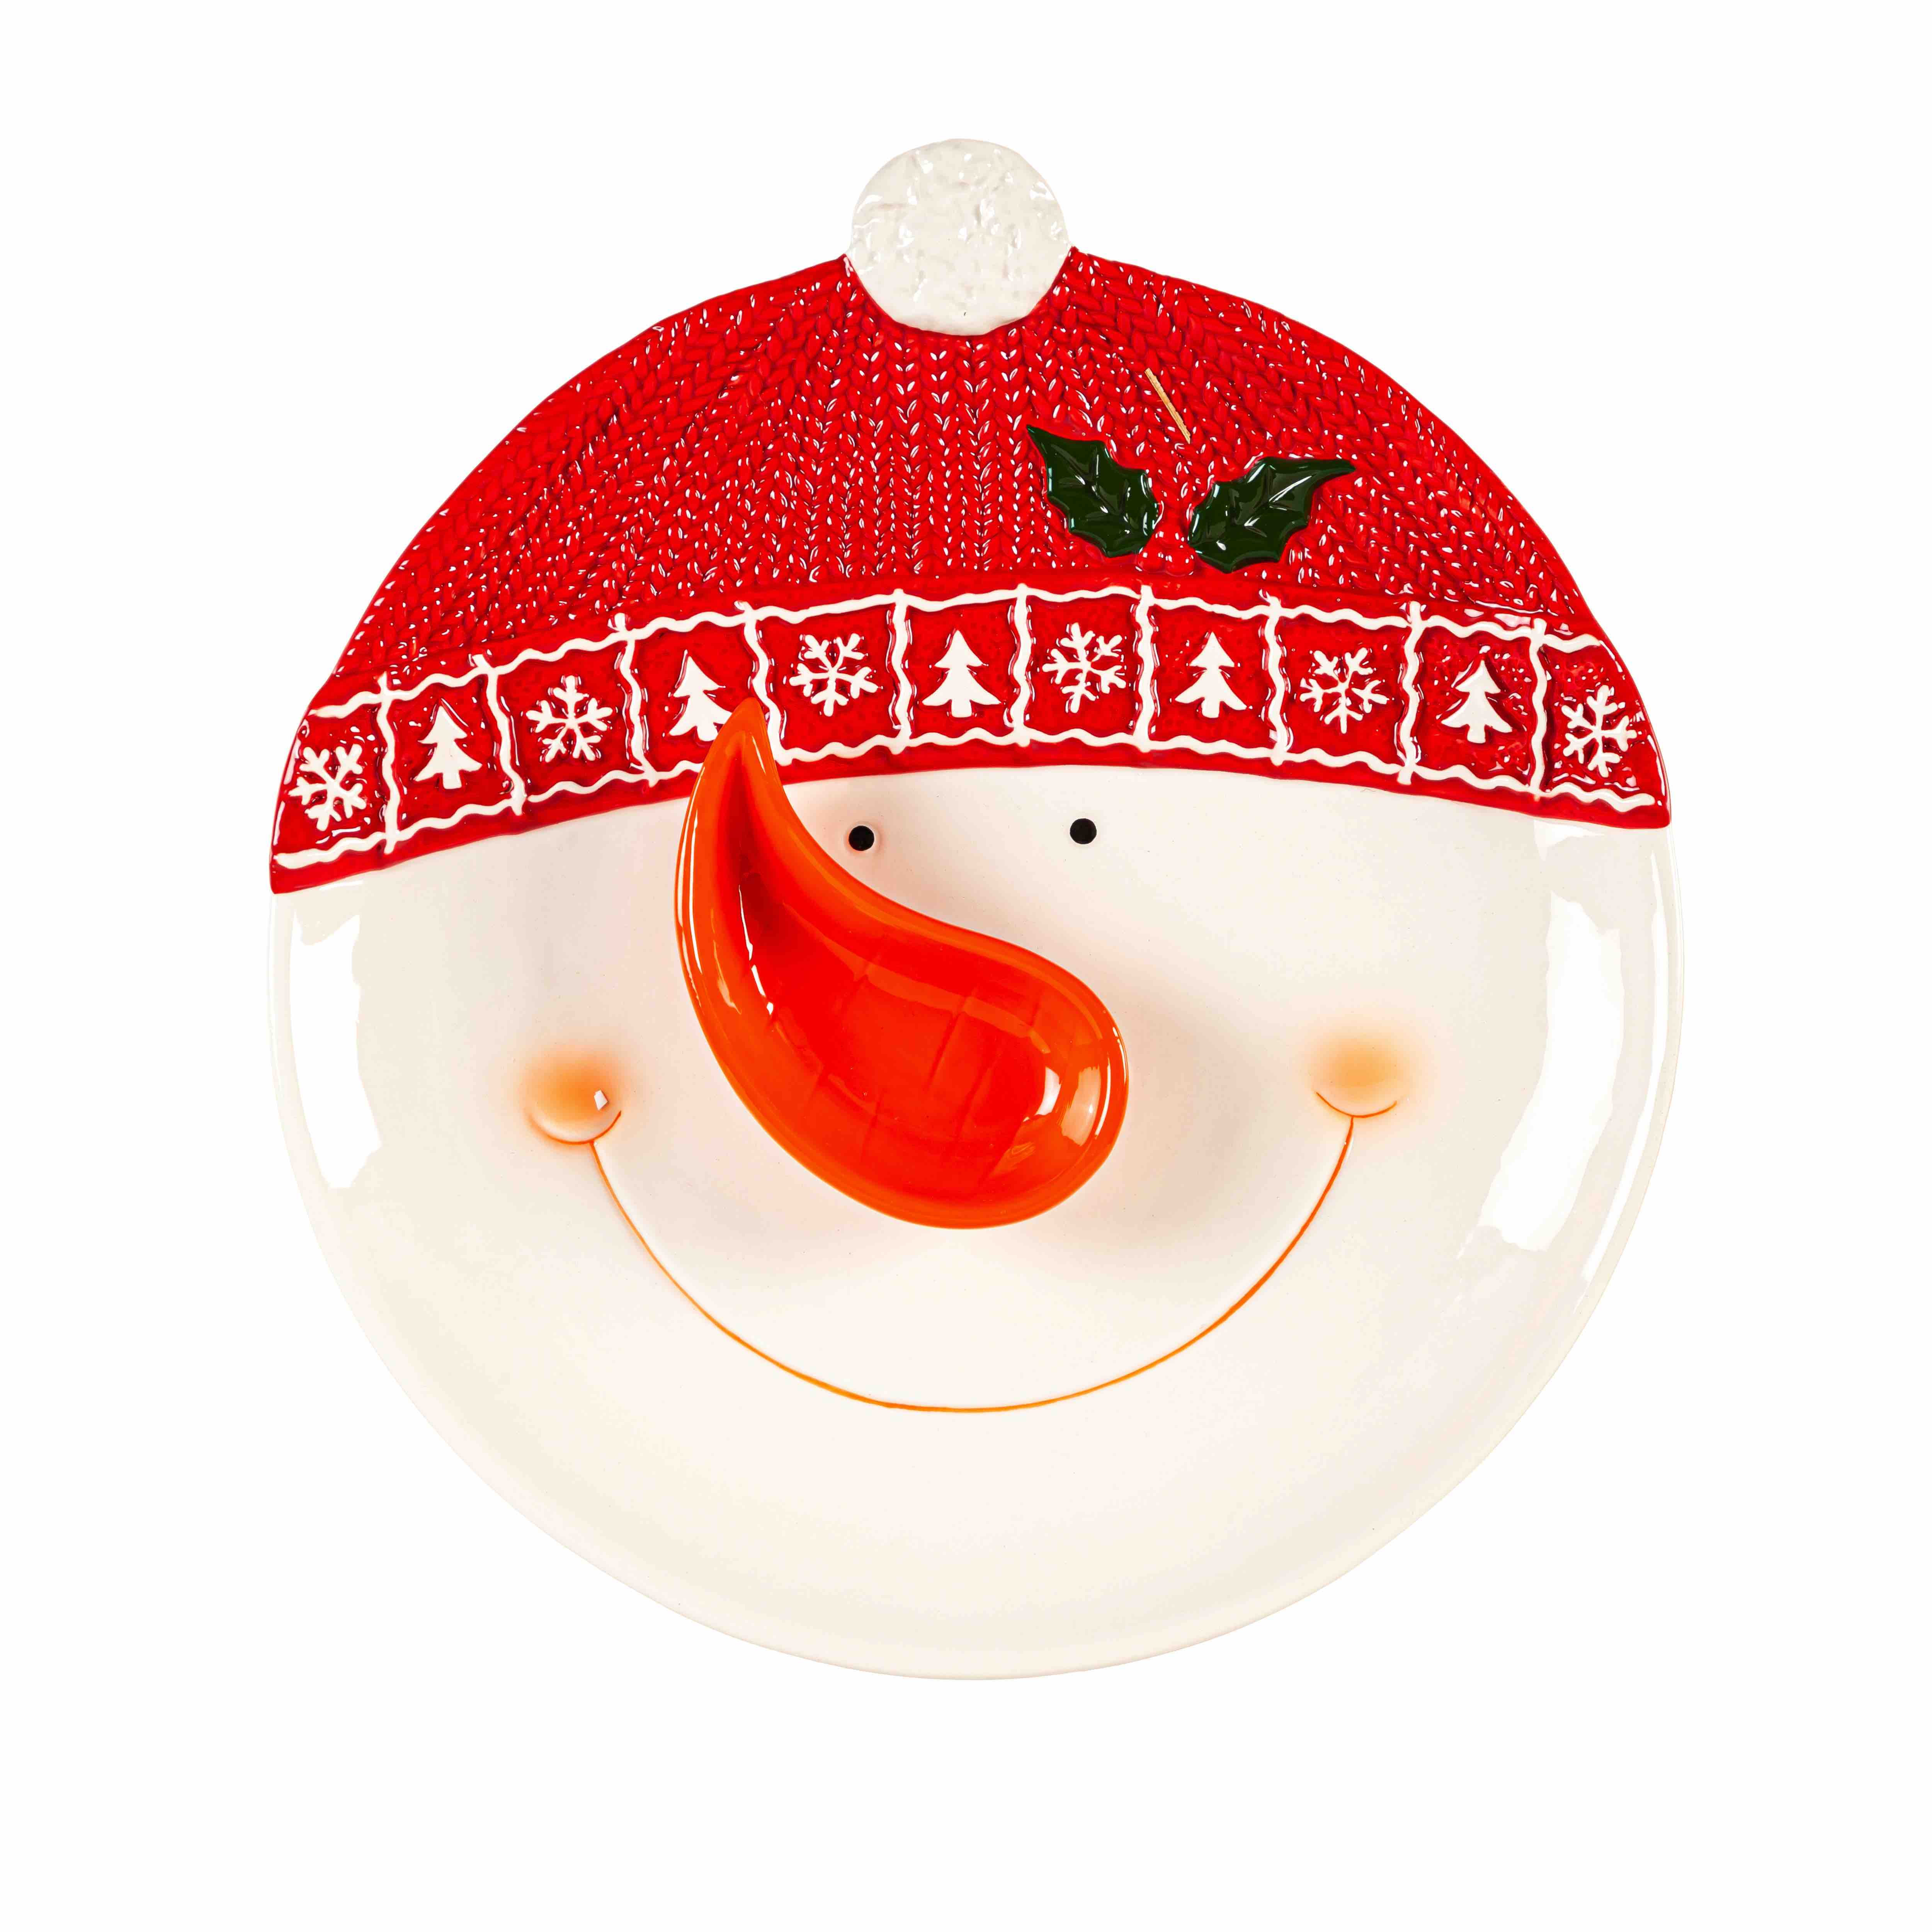 Snowman Serving Plate with Removeable Dip Bowl Set